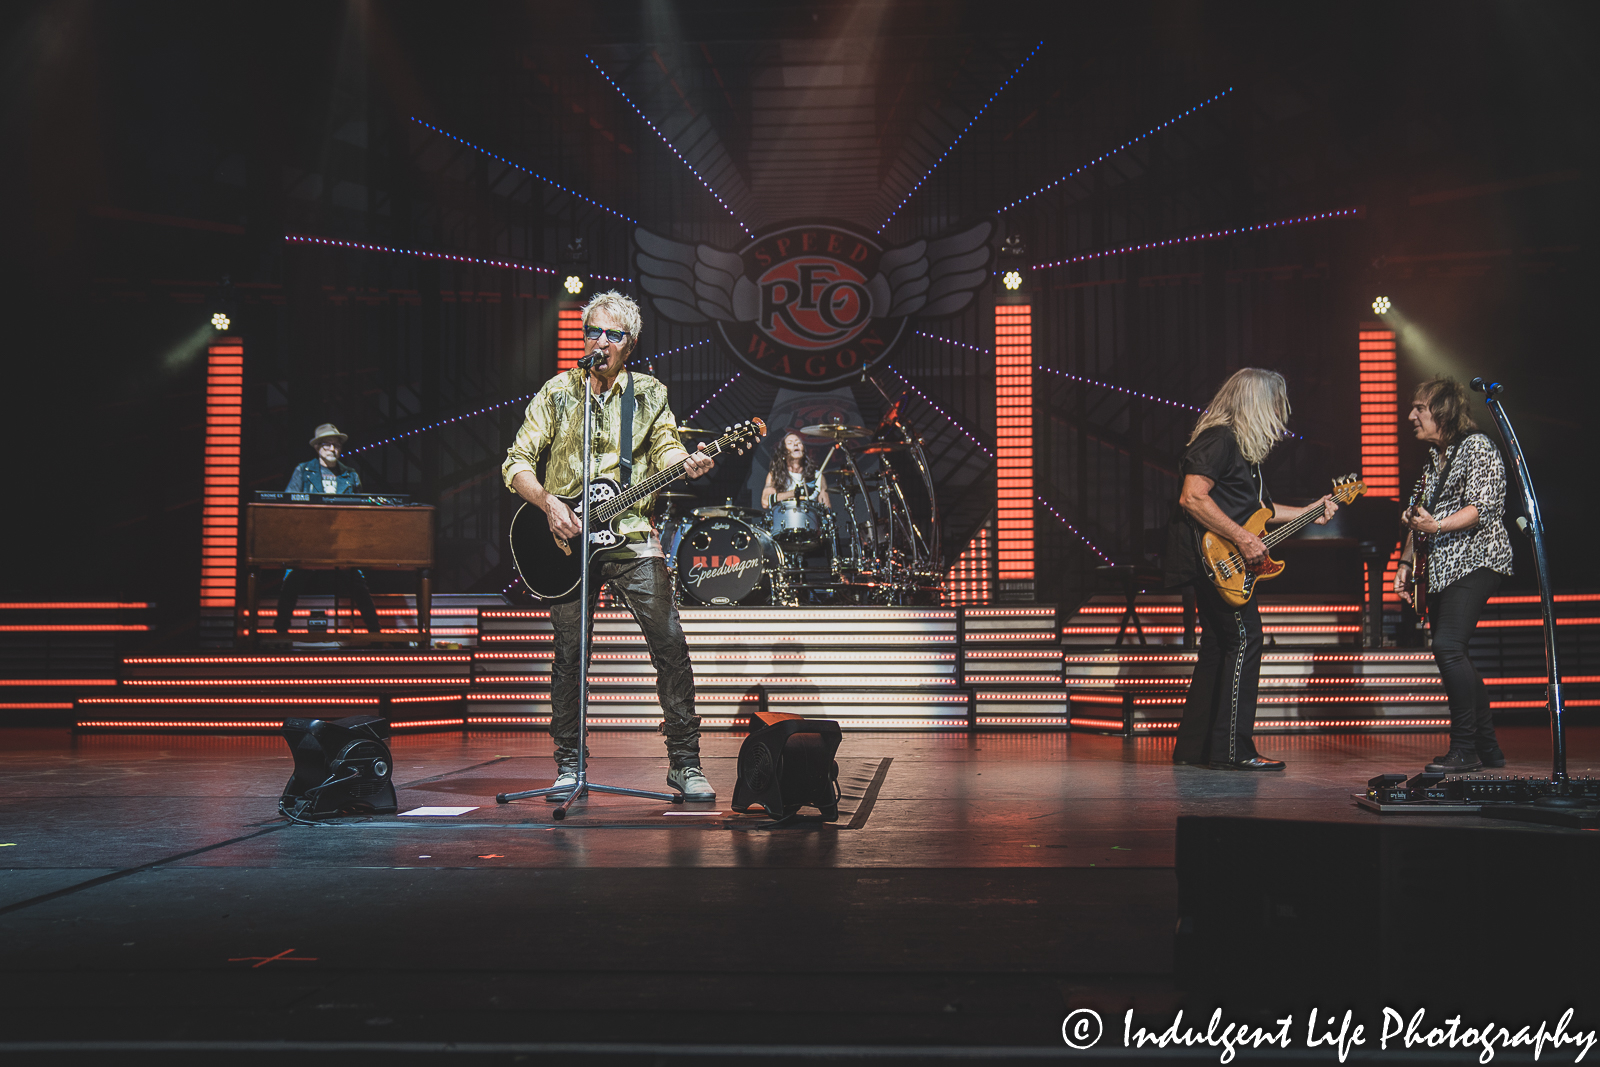 Rock band REO Speedwagon performing live in concert at Starlight Theatre in Kansas City, MO on June 14, 2022.